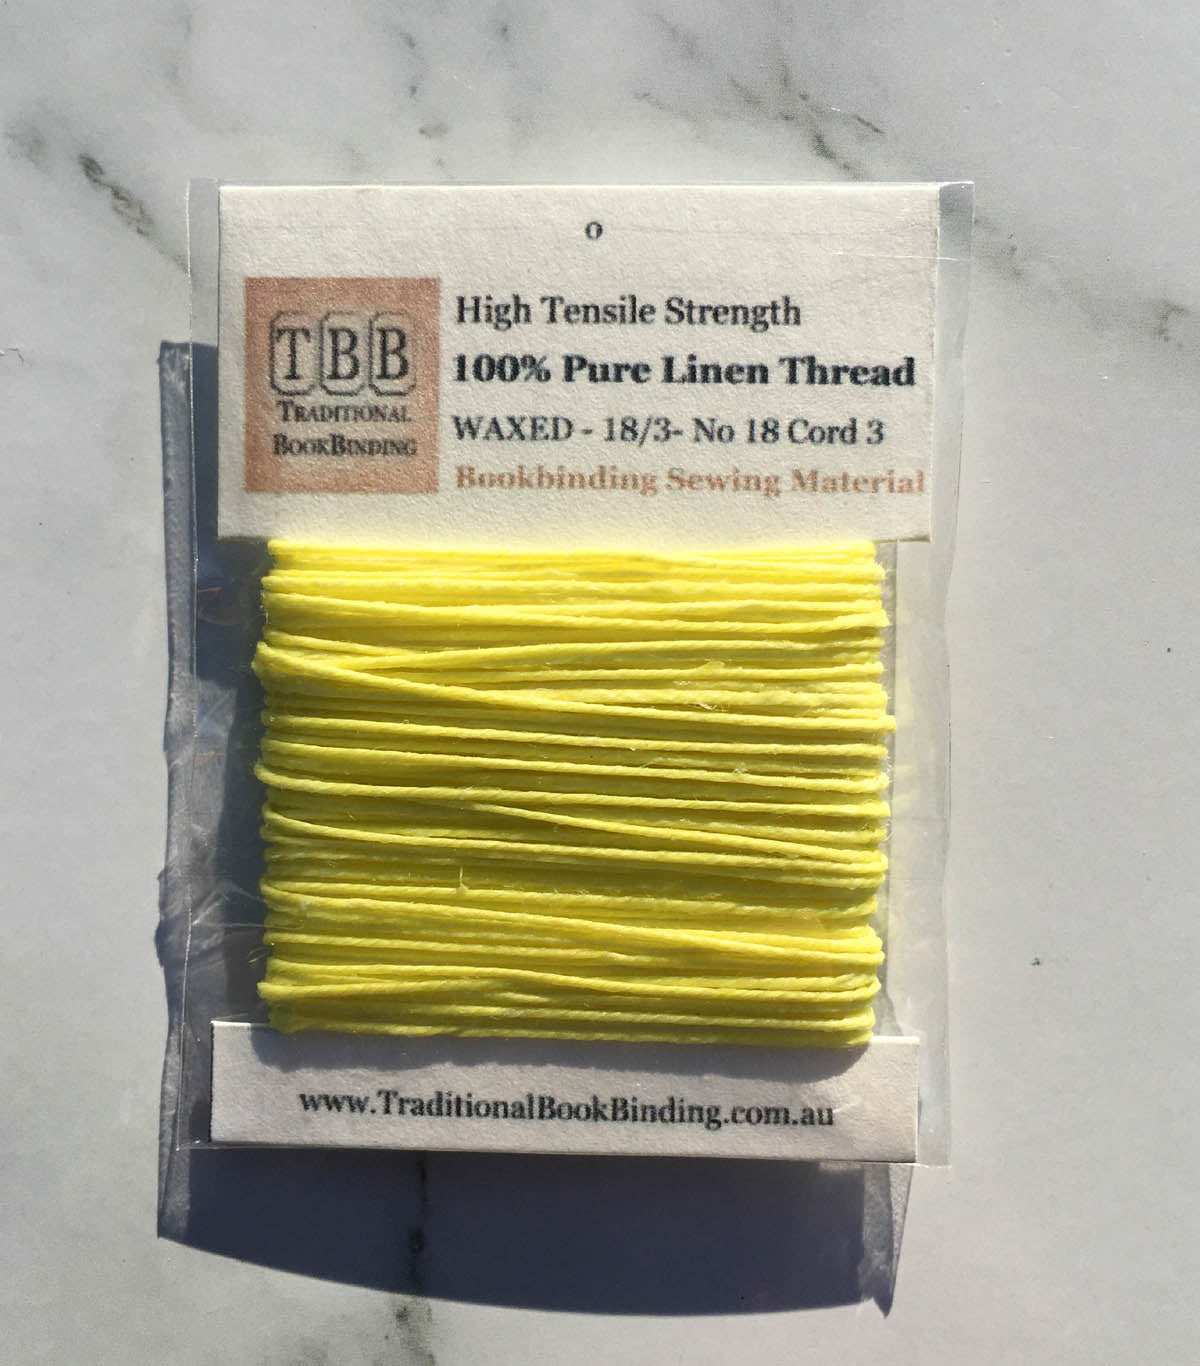 LEMON YELLOW- 100% Pure Linen Thread- Waxed- 18/3 No.18 Cord 3- Approx 0.55mm thick